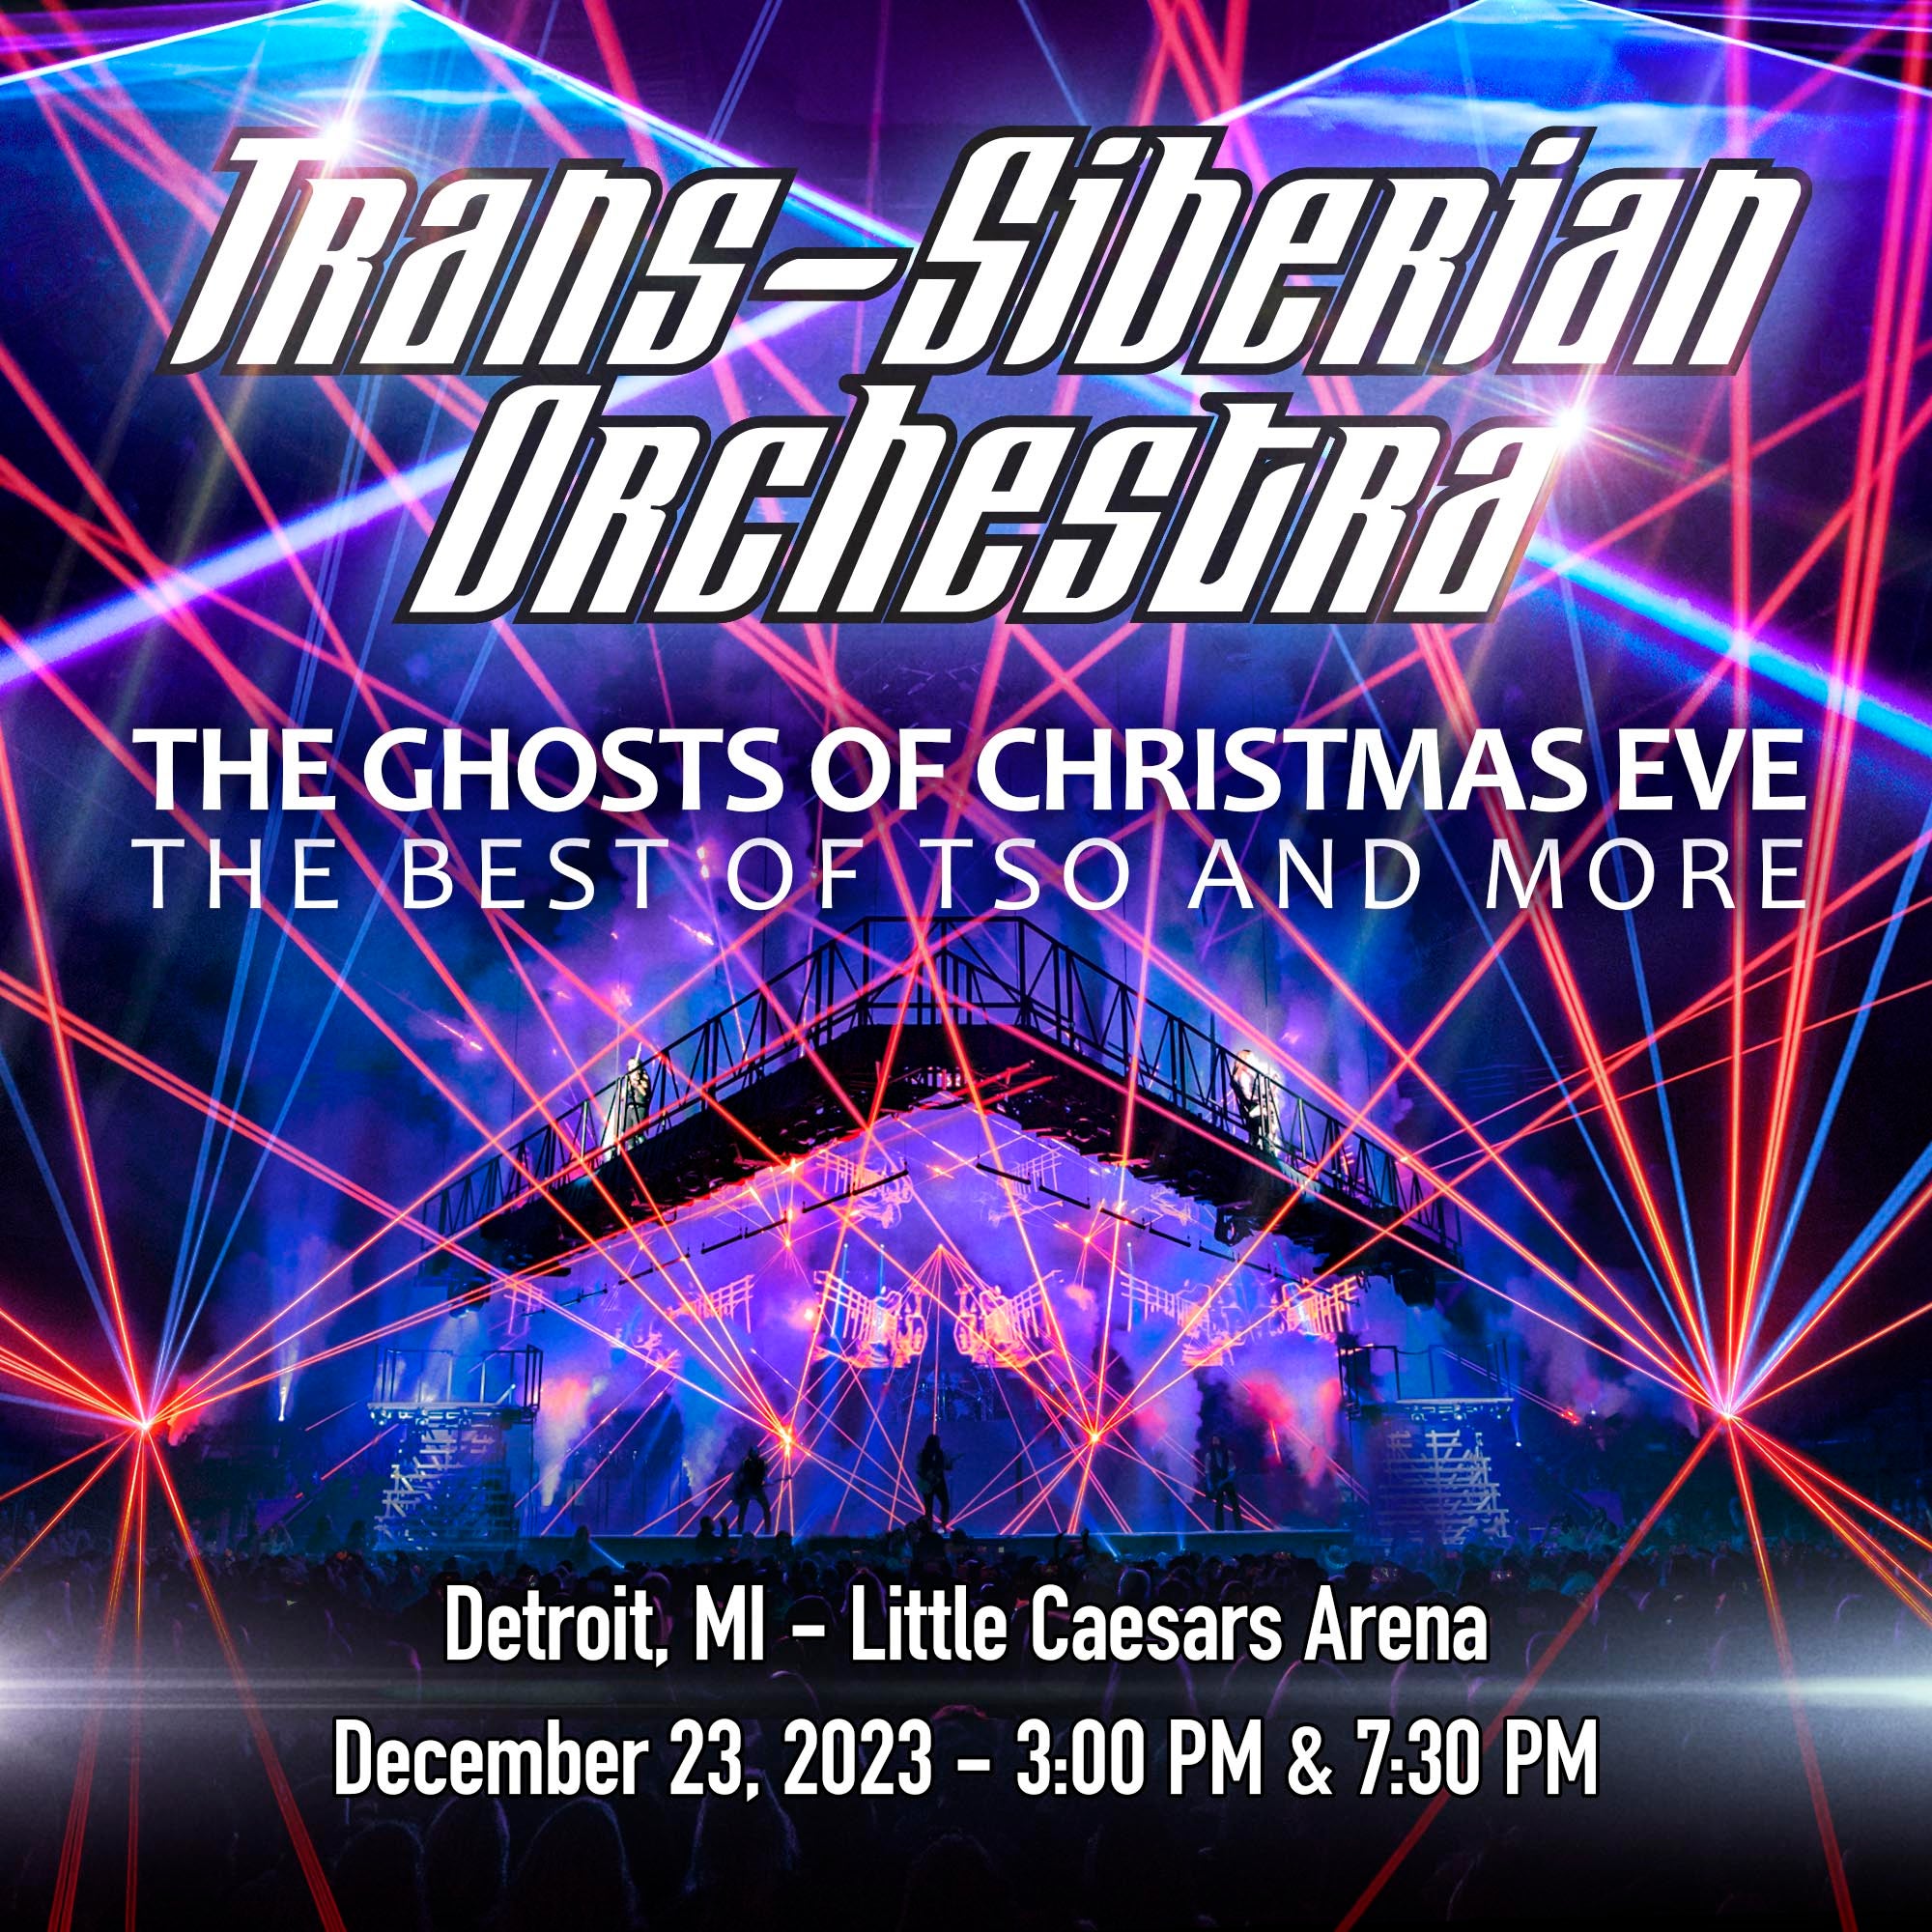 Transsiberian Orchestra Announces “the Ghosts Of Christmas Eve The